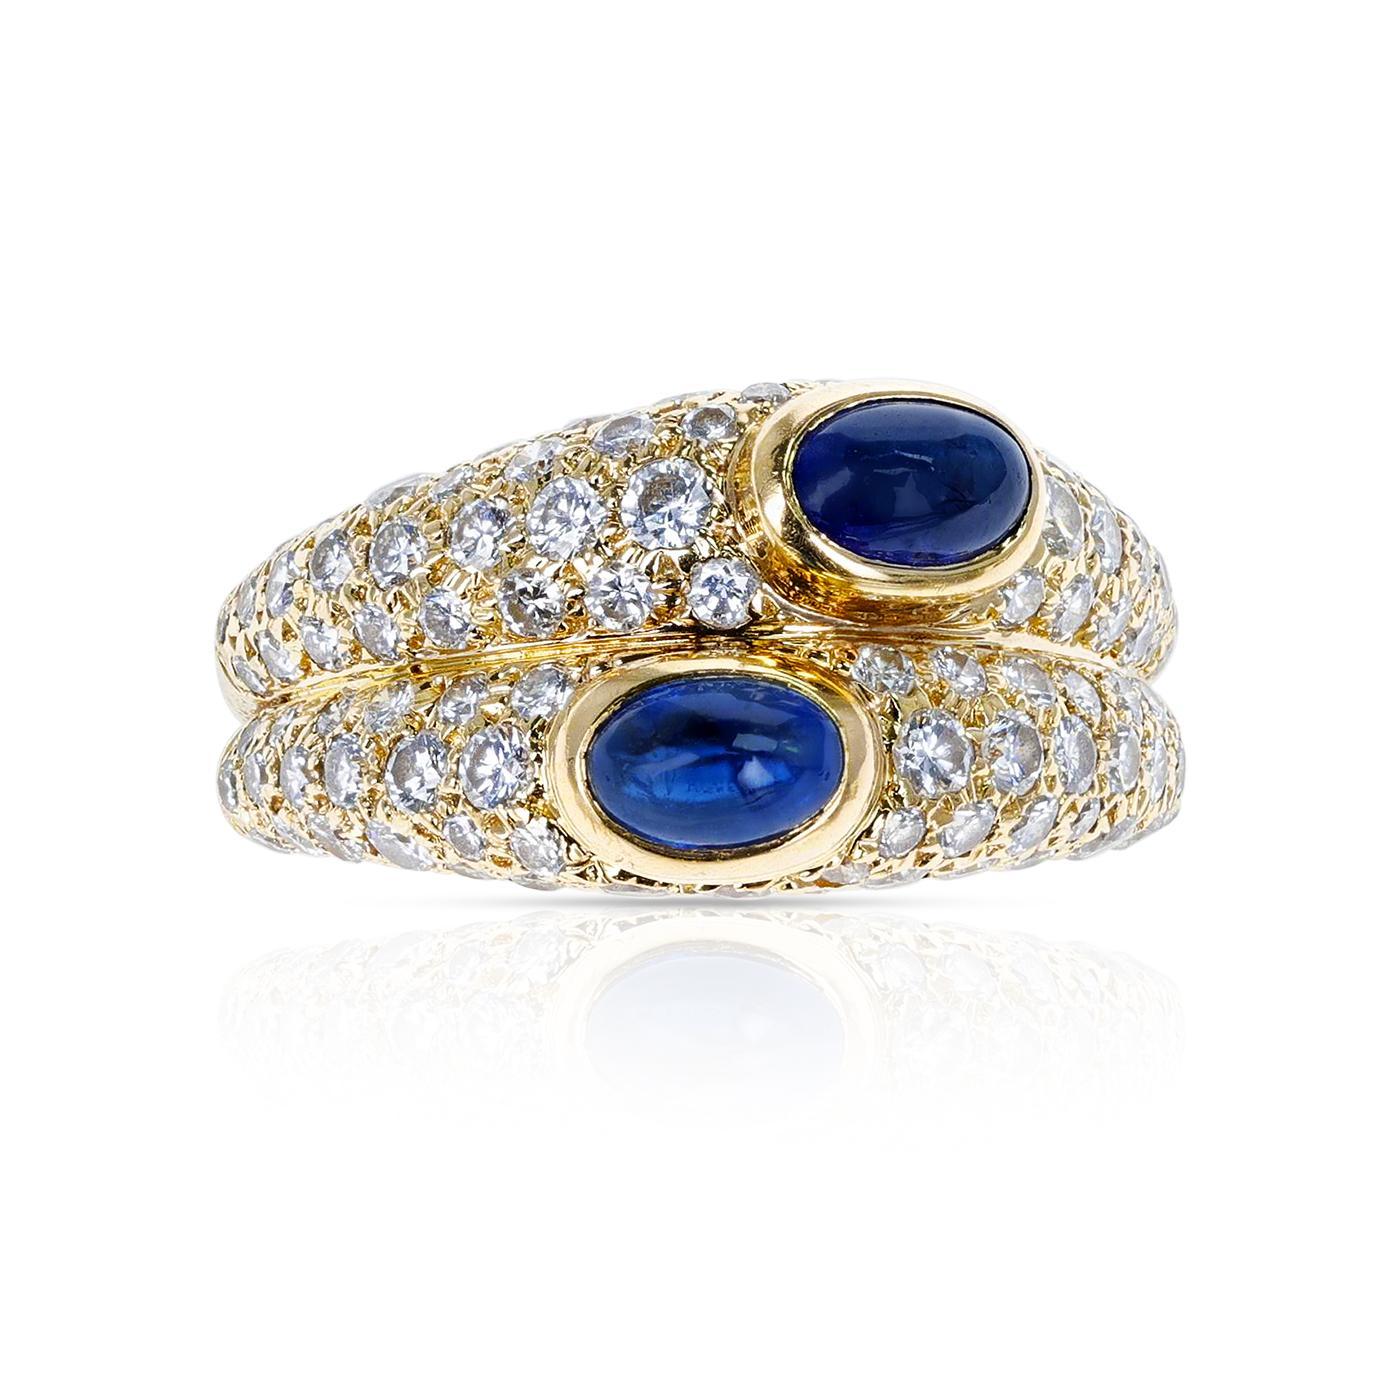 A Cartier Paris Double Sapphire Cabochon and Diamond Ring made in 18K Yellow Gold. Total Weight: 7.26 grams, Ring Size US 6.50.  